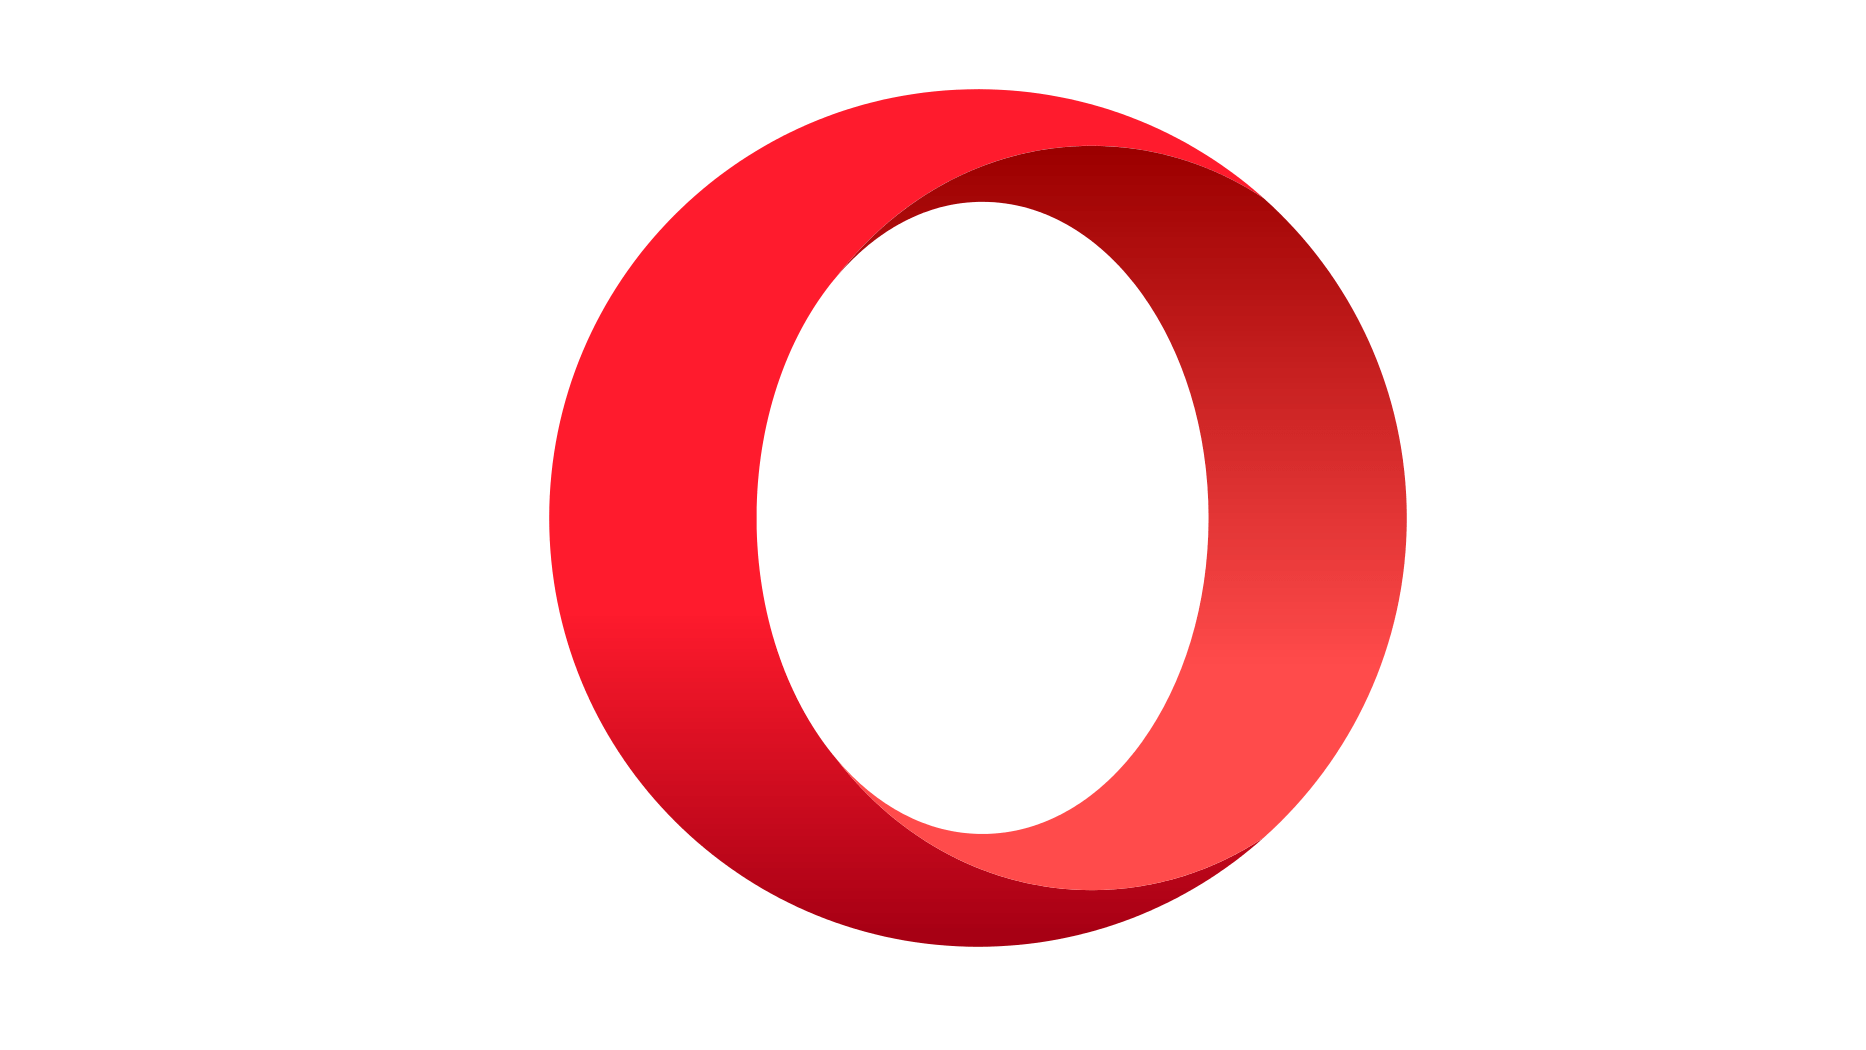 Over 350M Opera Users Can Now Make Direct Bitcoin Payments via Browser